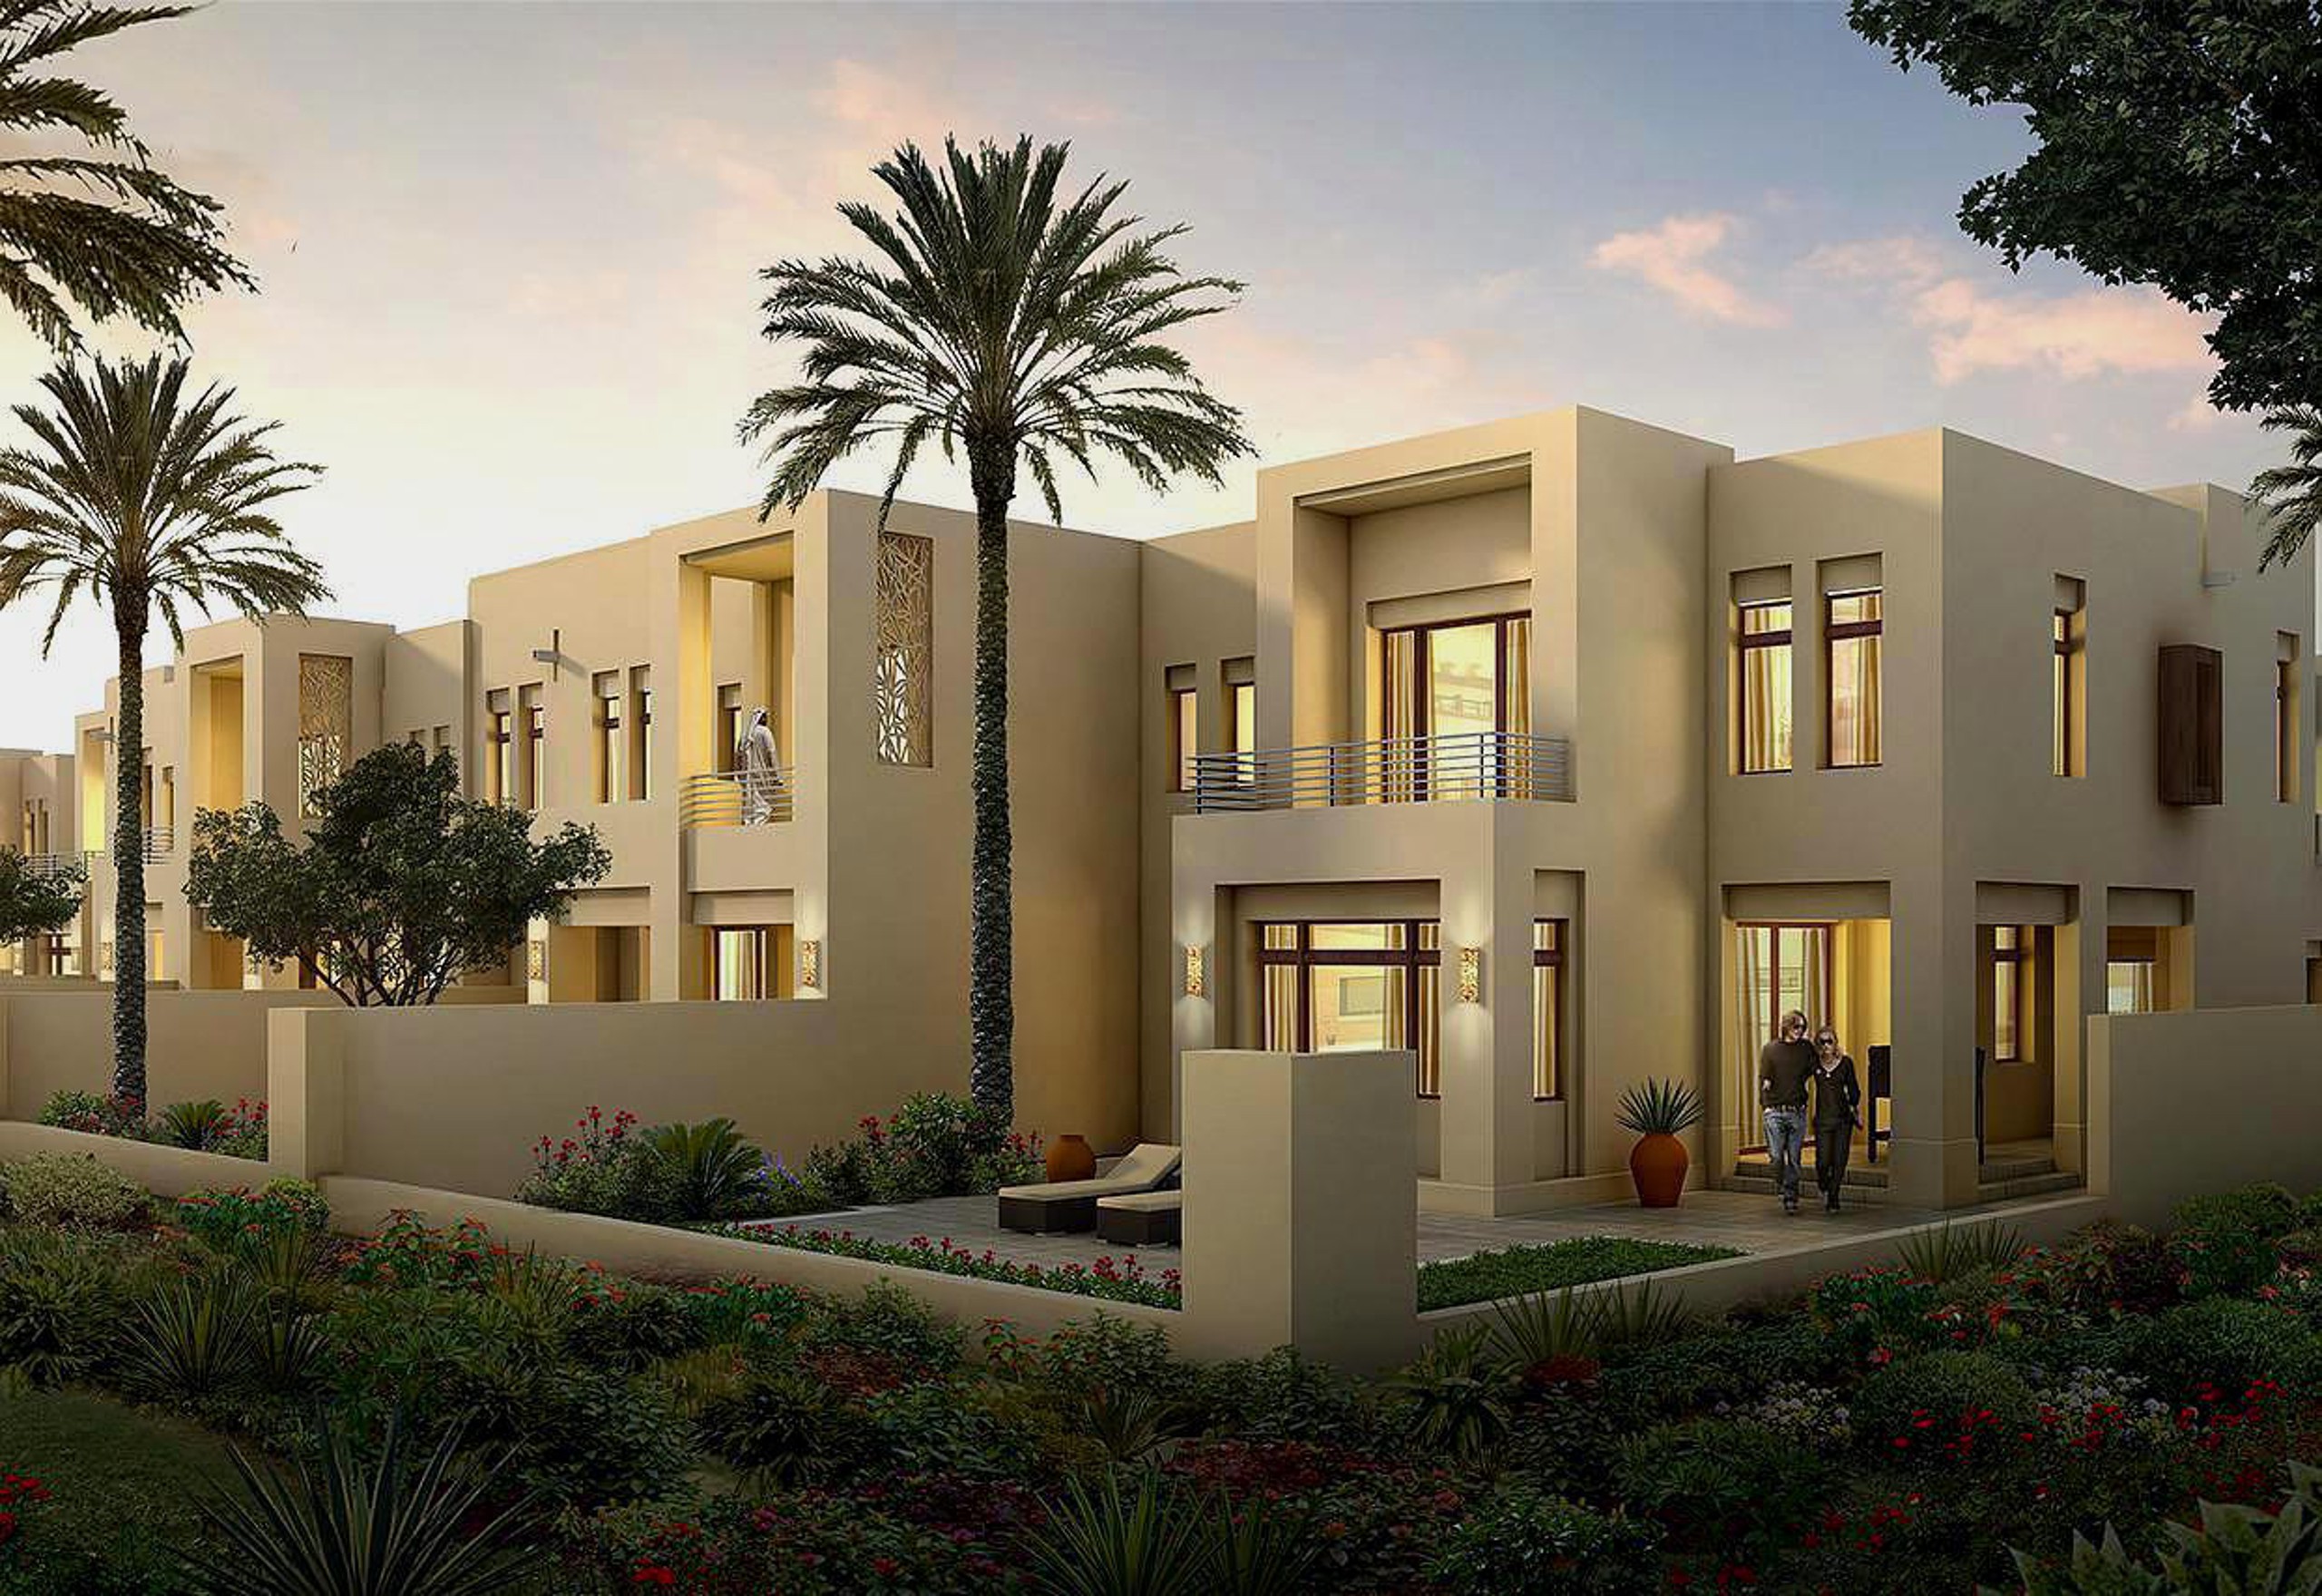 uploads/sale_property/3-br-townhouses-for-sale-in-mira-oasis-iii/d4f700162fb6822b79d879e2a67f86d8.webp